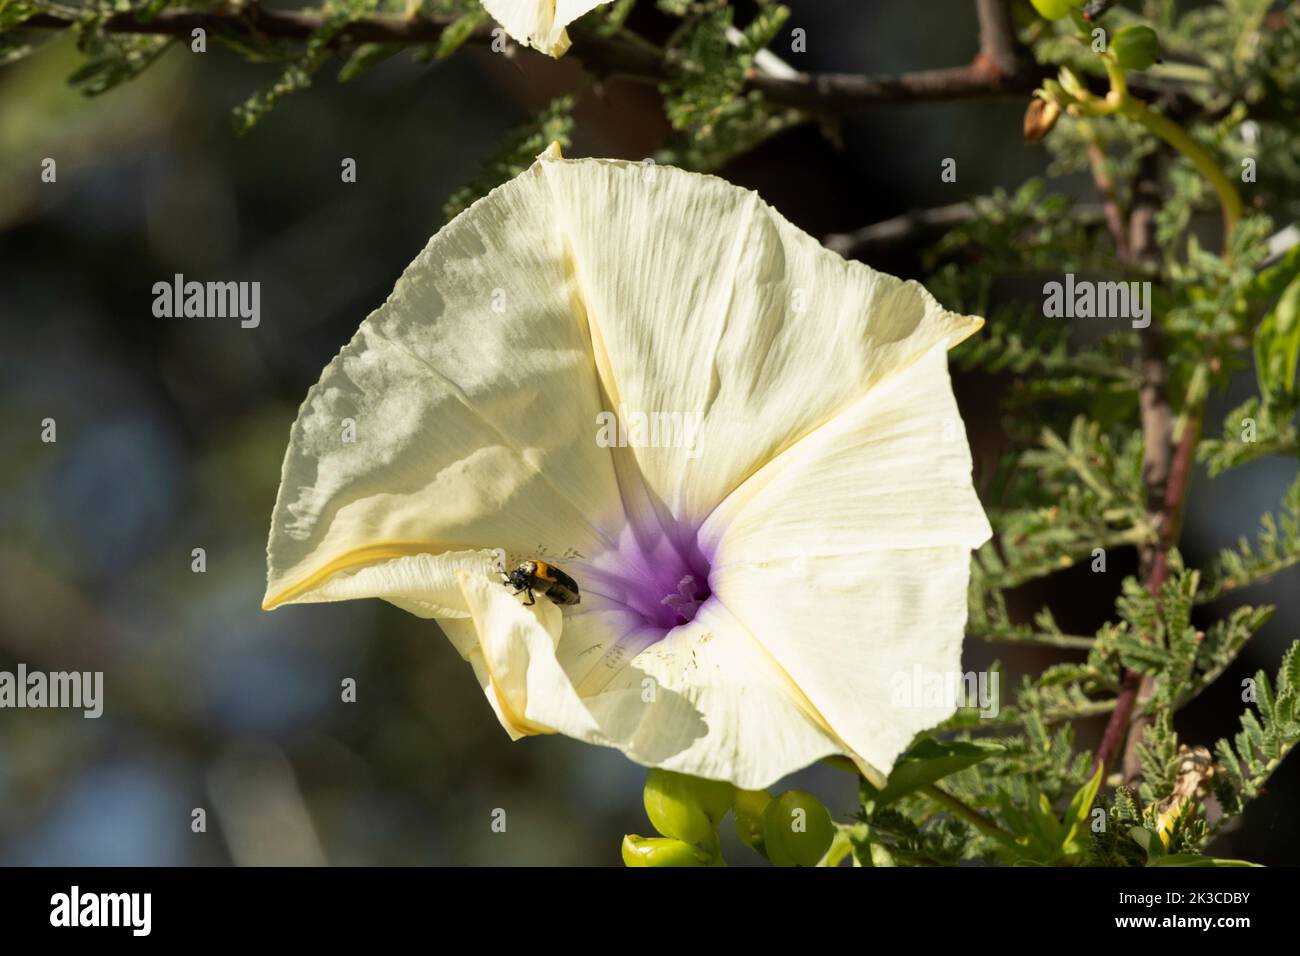 A Lunate Blister Beetle feeds on the petals of a Cream-coloured Ipomea. These flowers open each morning and close up as the heat builds towards midday Stock Photo